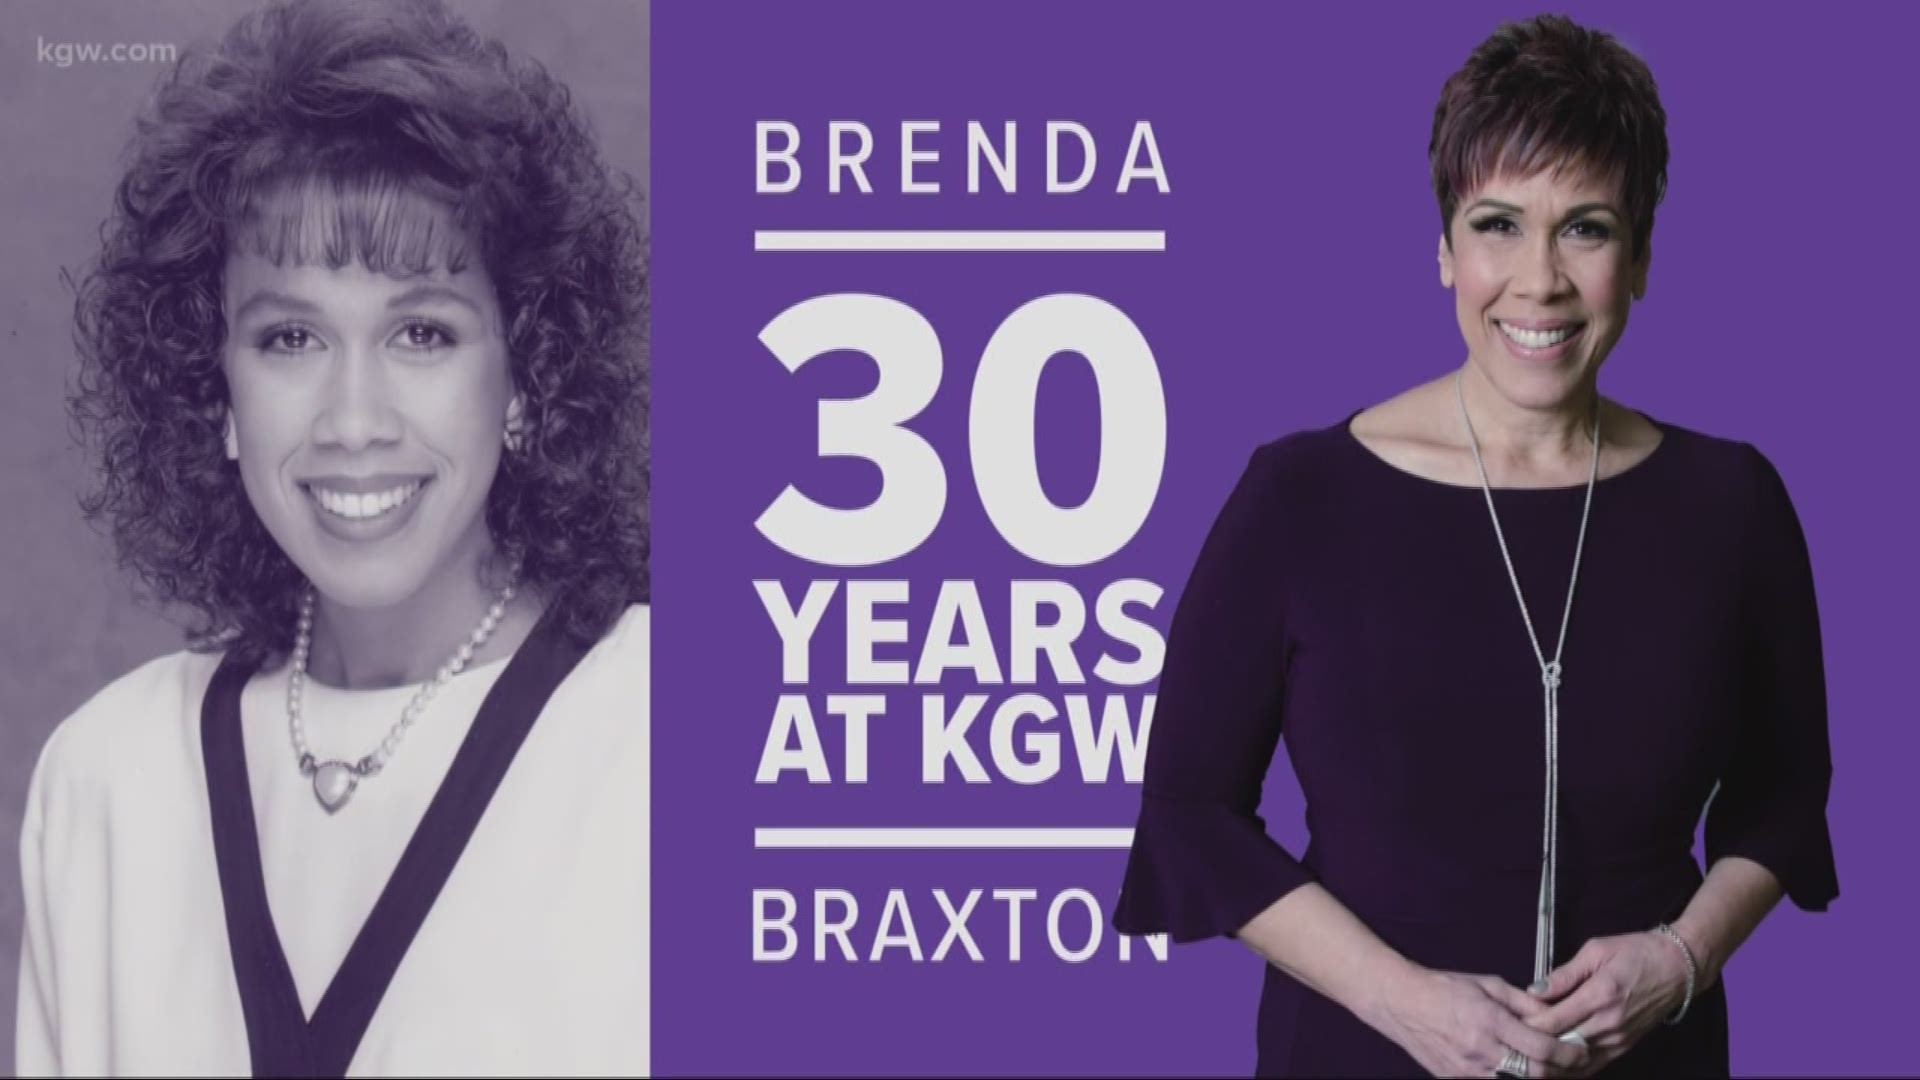 All kinds of accolades poured in for veteran Sunrise anchor Brenda Braxton.